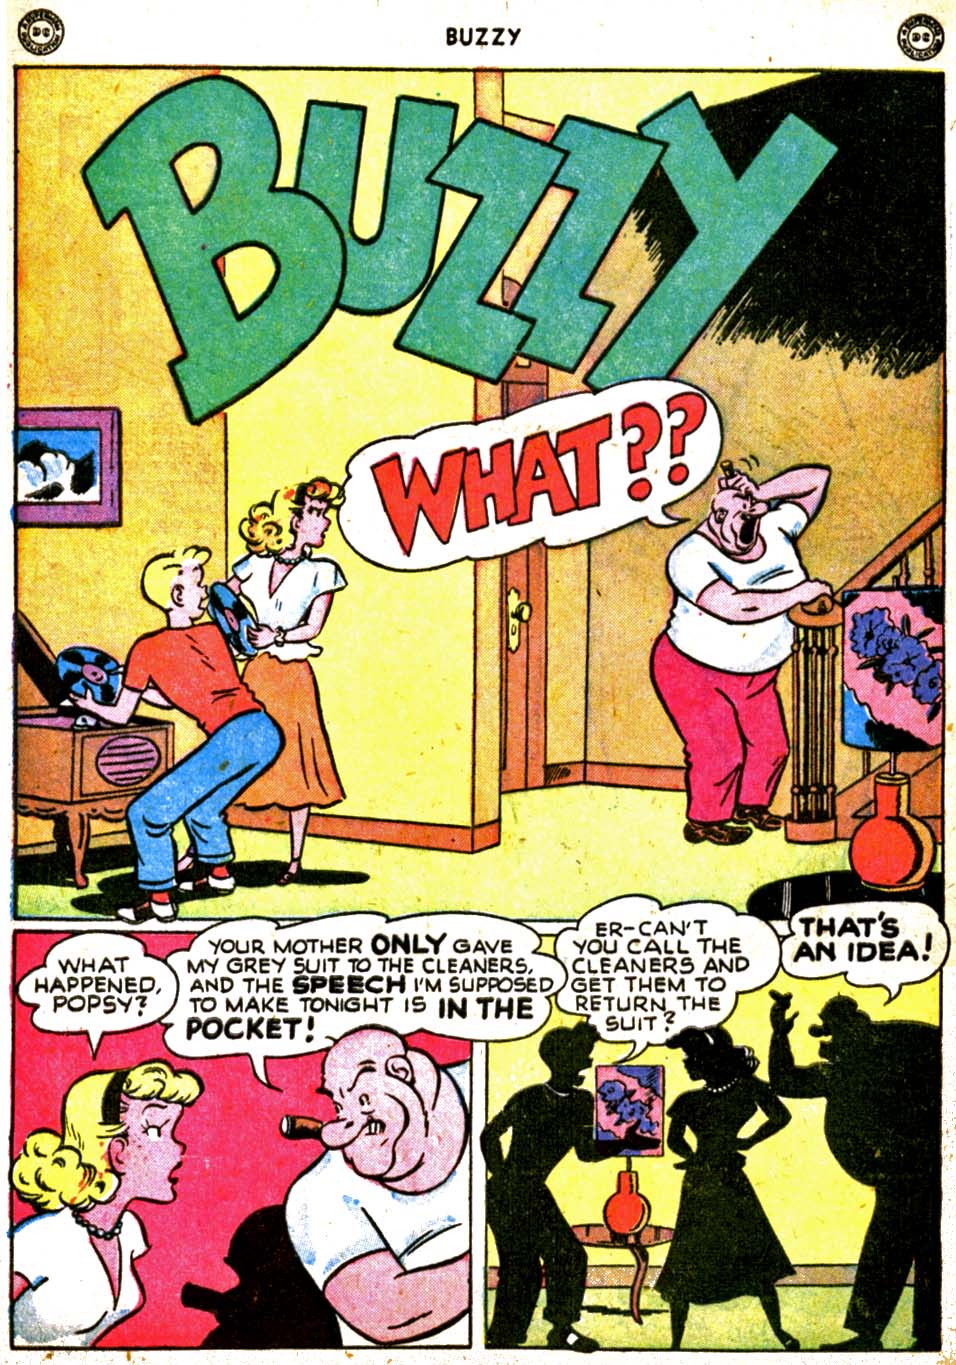 Read online Buzzy comic -  Issue #23 - 12